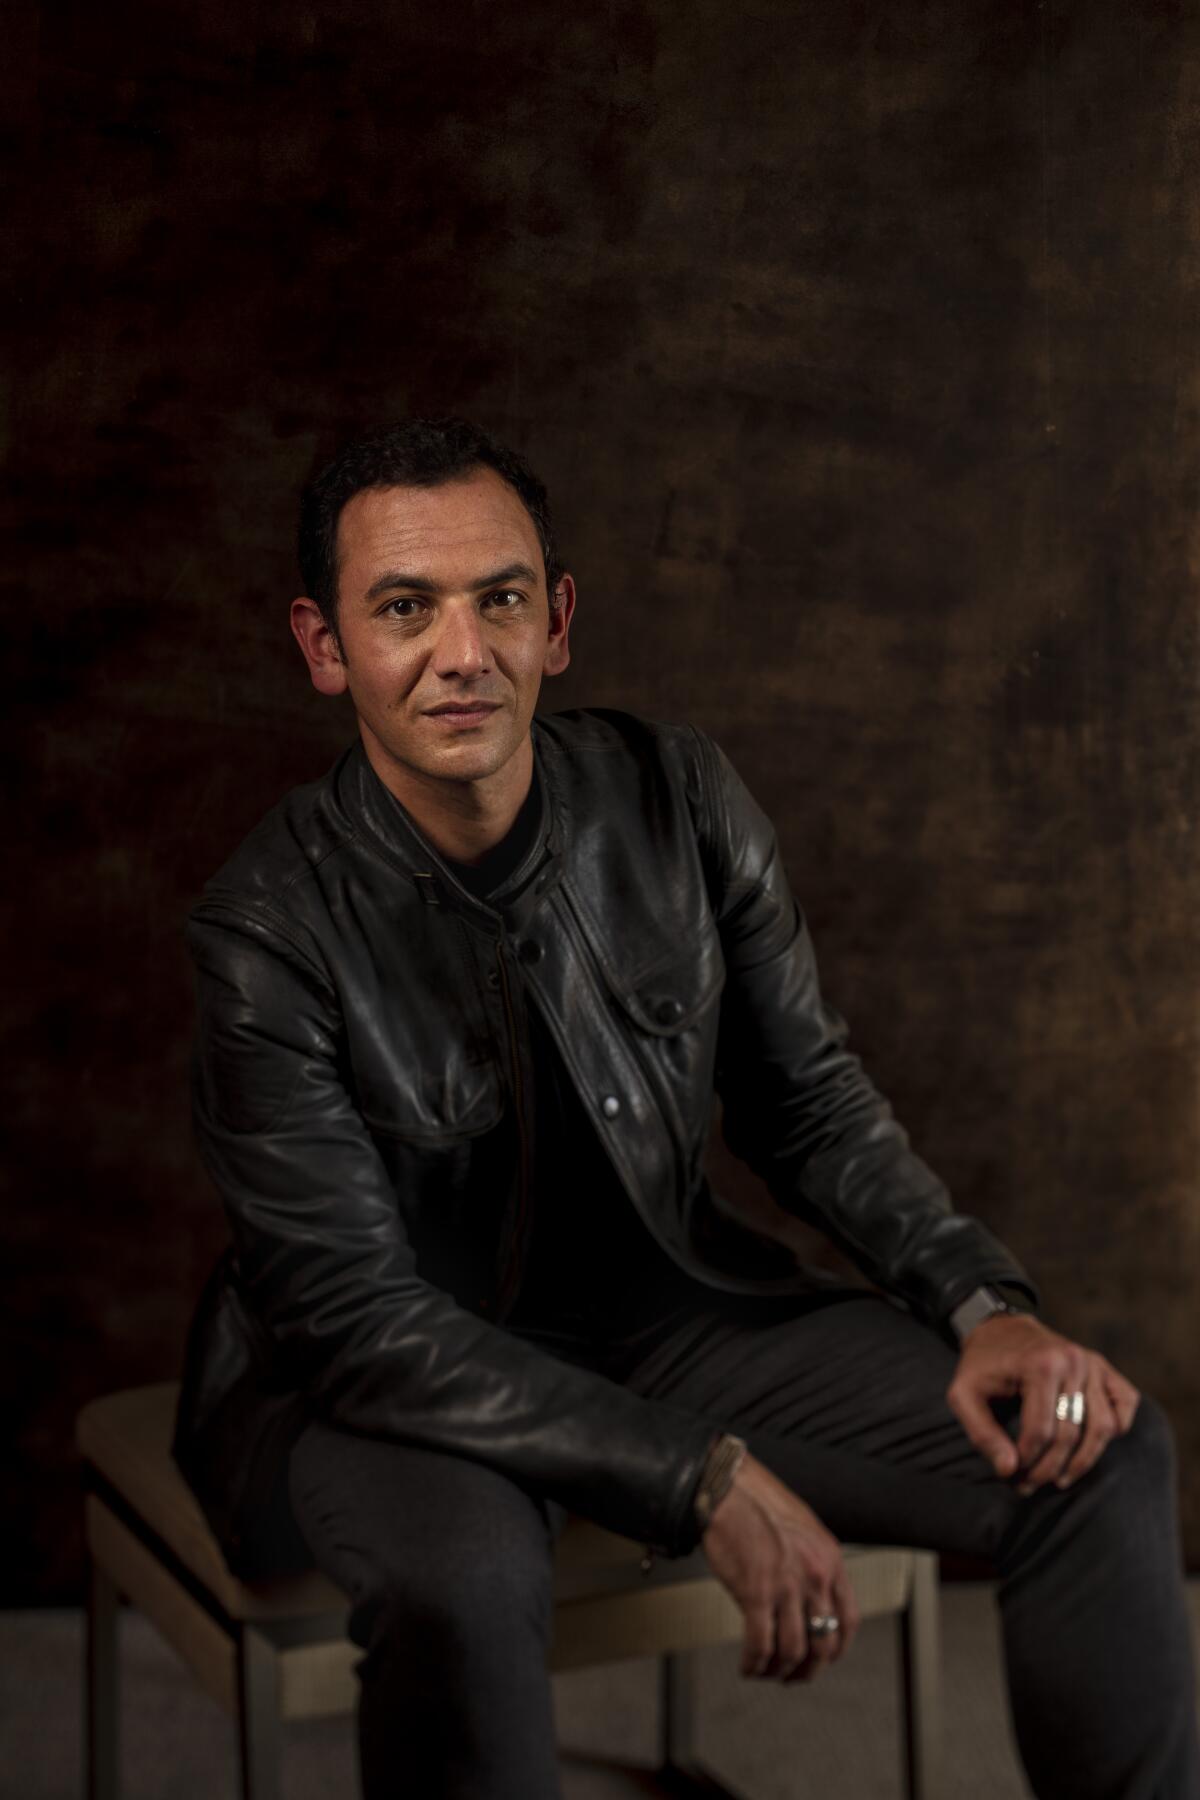 Screenwriter Roberto Bentivegna poses in a leather jacket sitting in a chair.